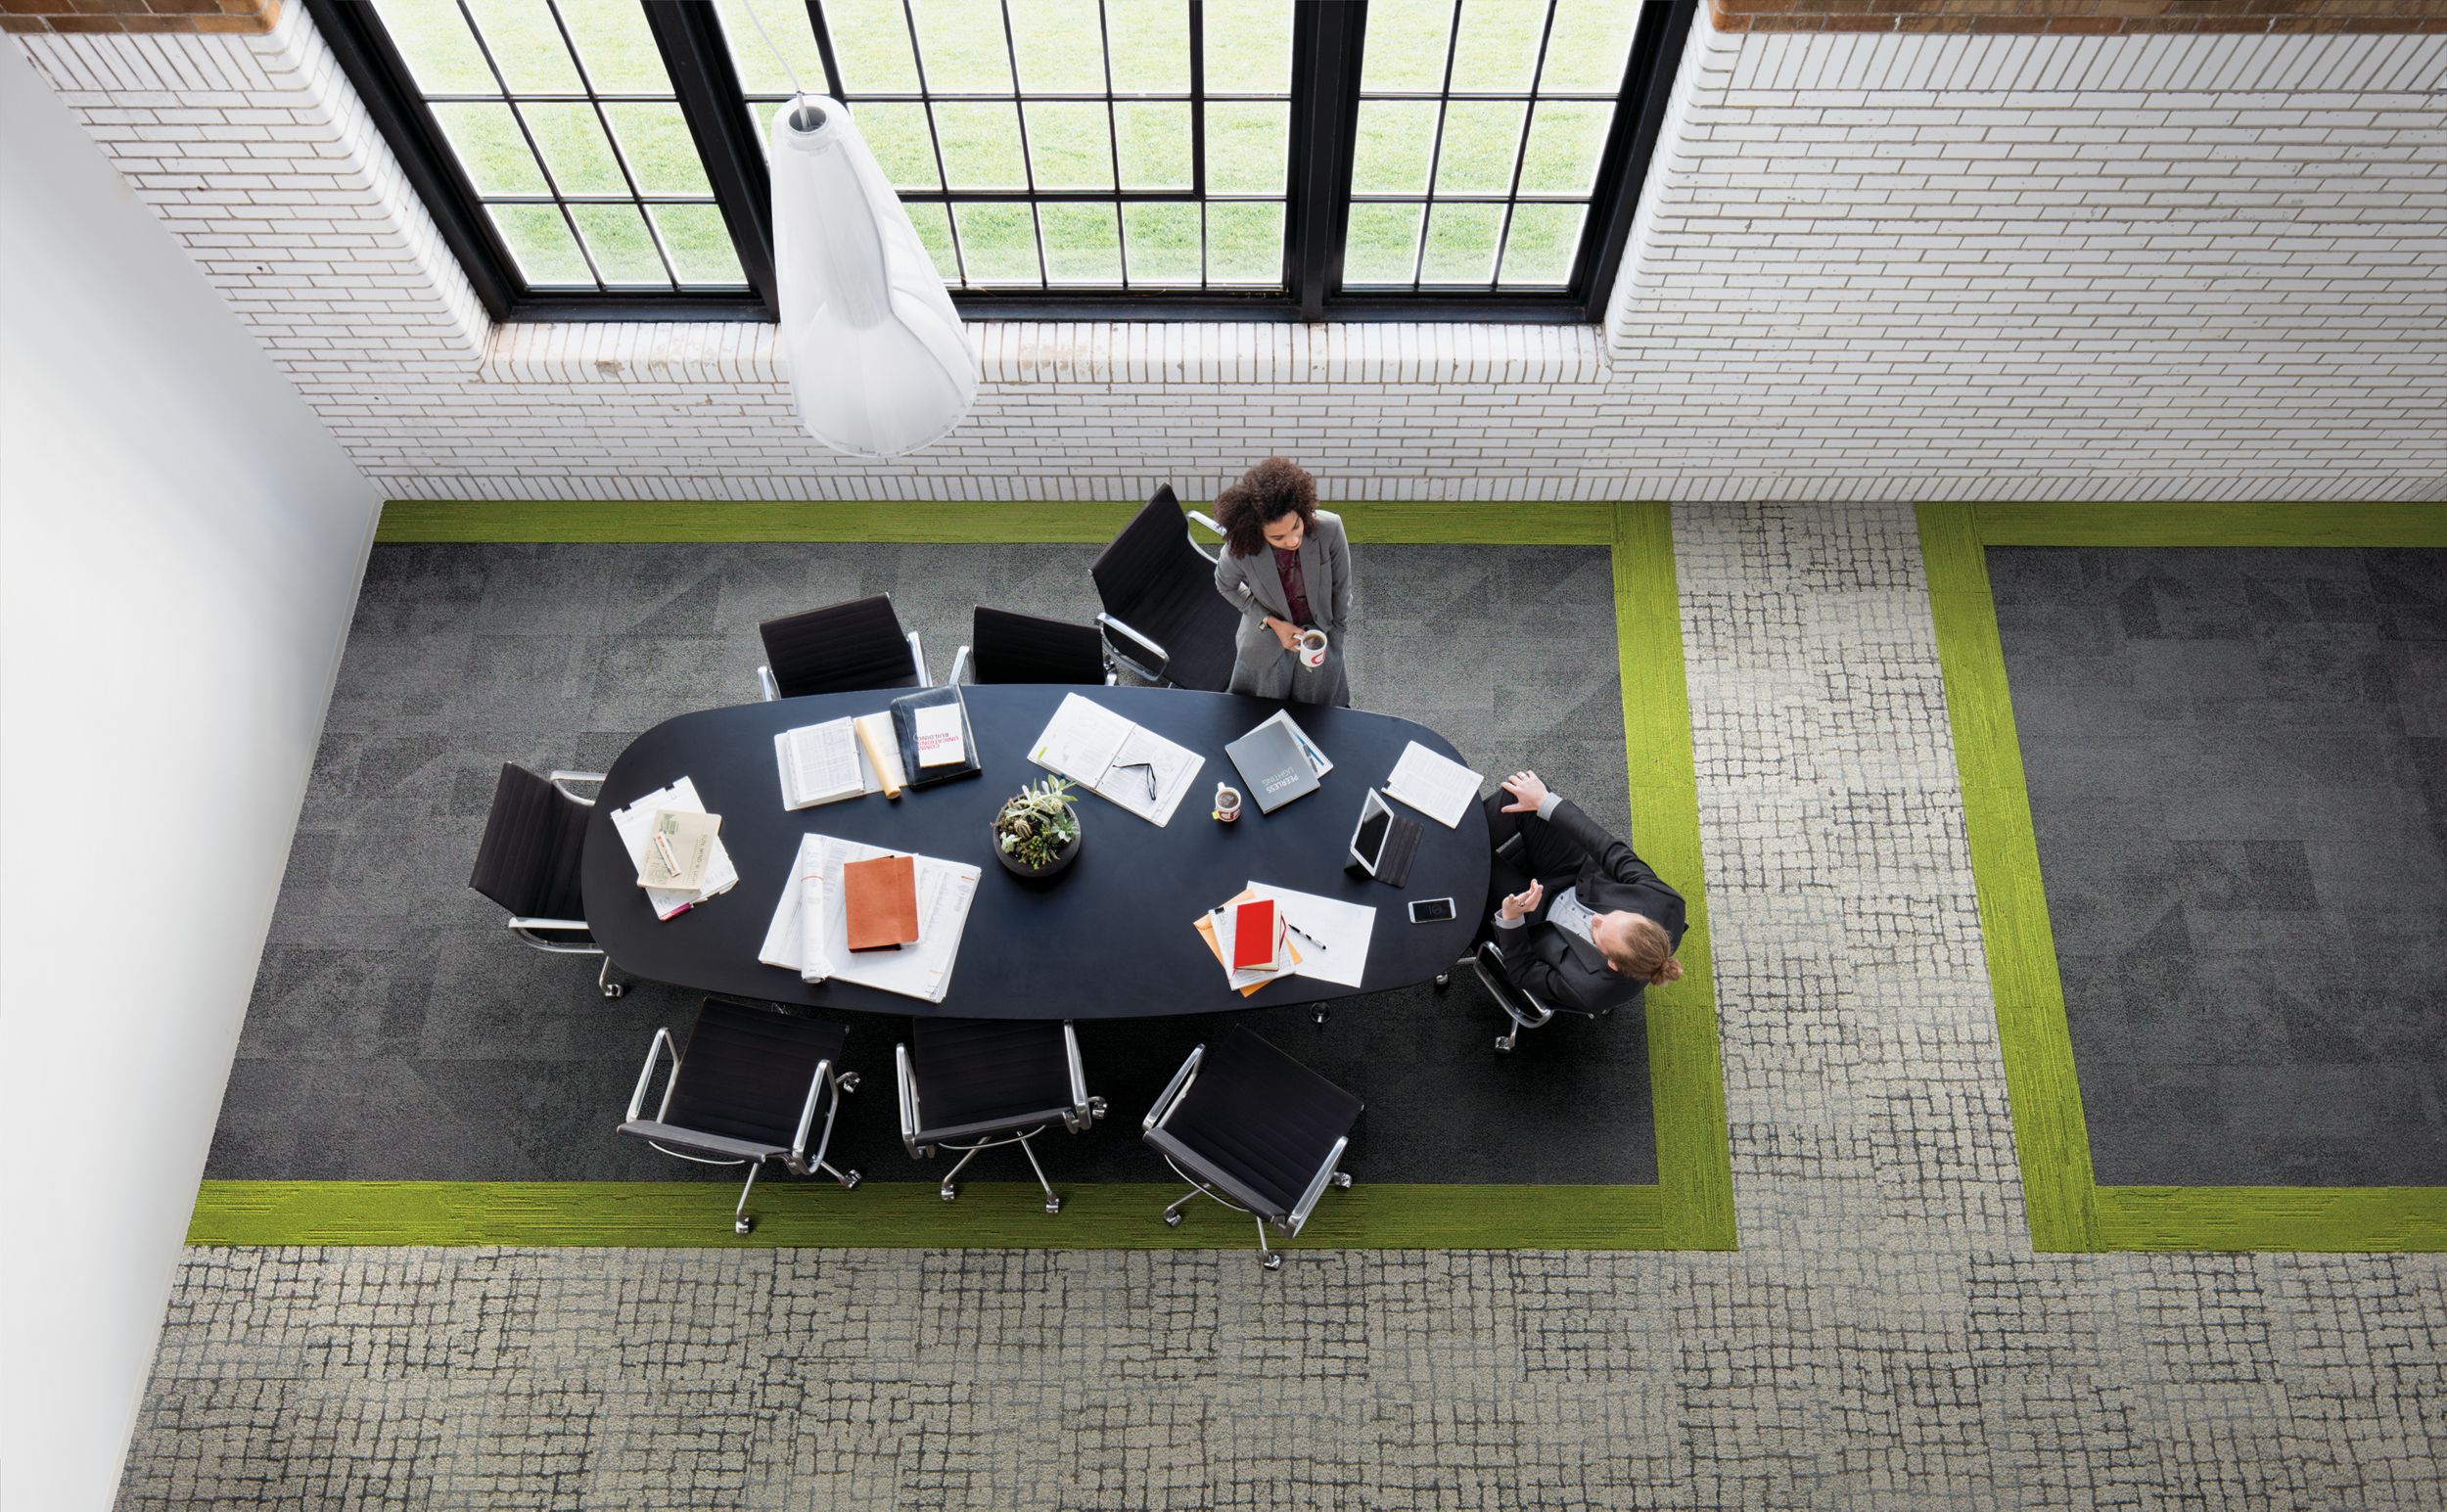 image Interface Paver and Sett in Stone carpet tile with UR501 plank carpet tile in overhead view of meeting area with man and women conversating numéro 3